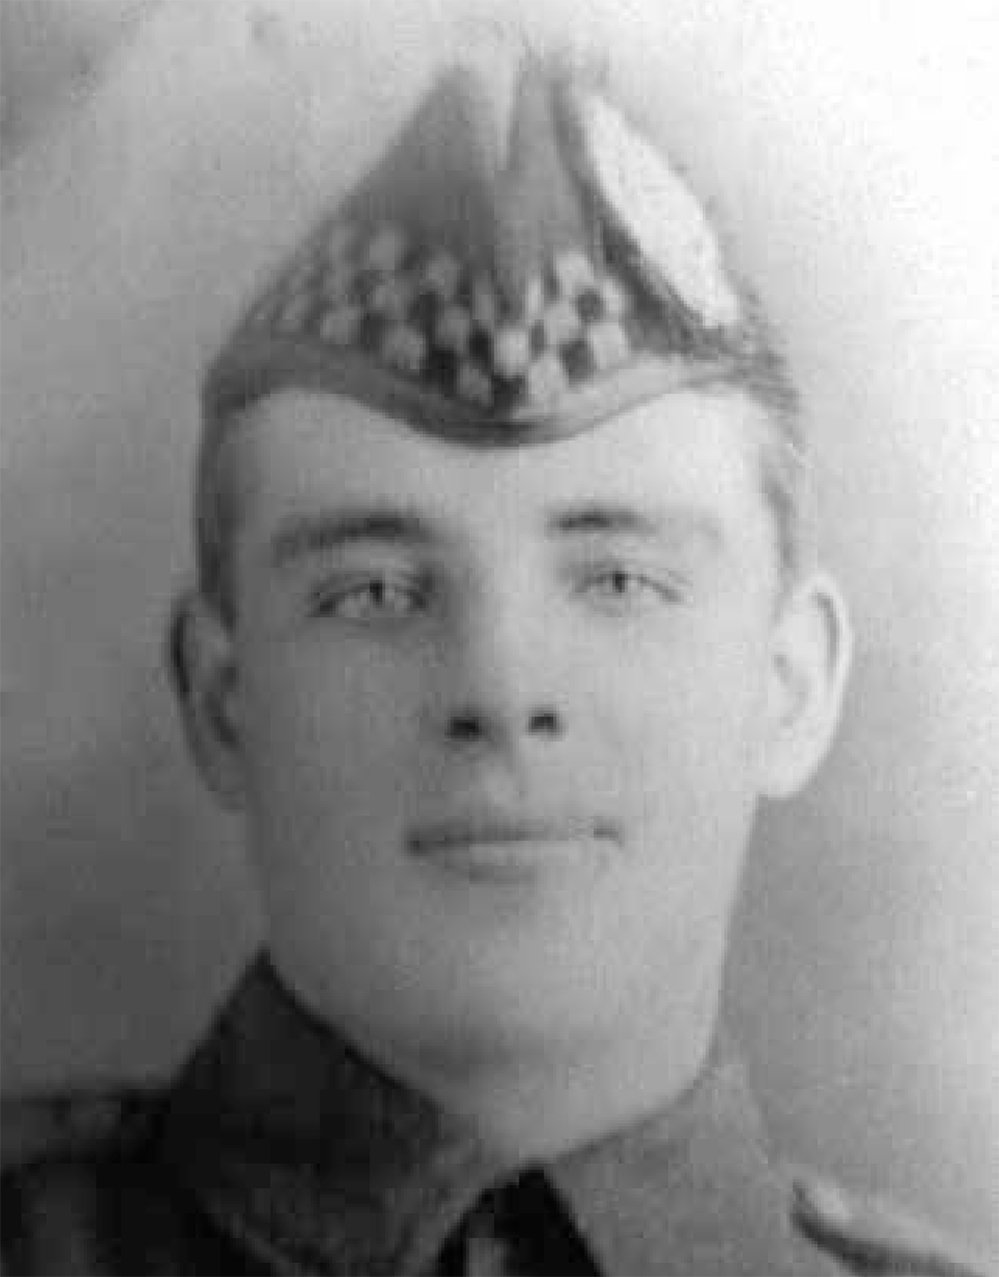 Private Lawrence Nealis, 2nd Bat. Argyll and Sutherland Highlanders